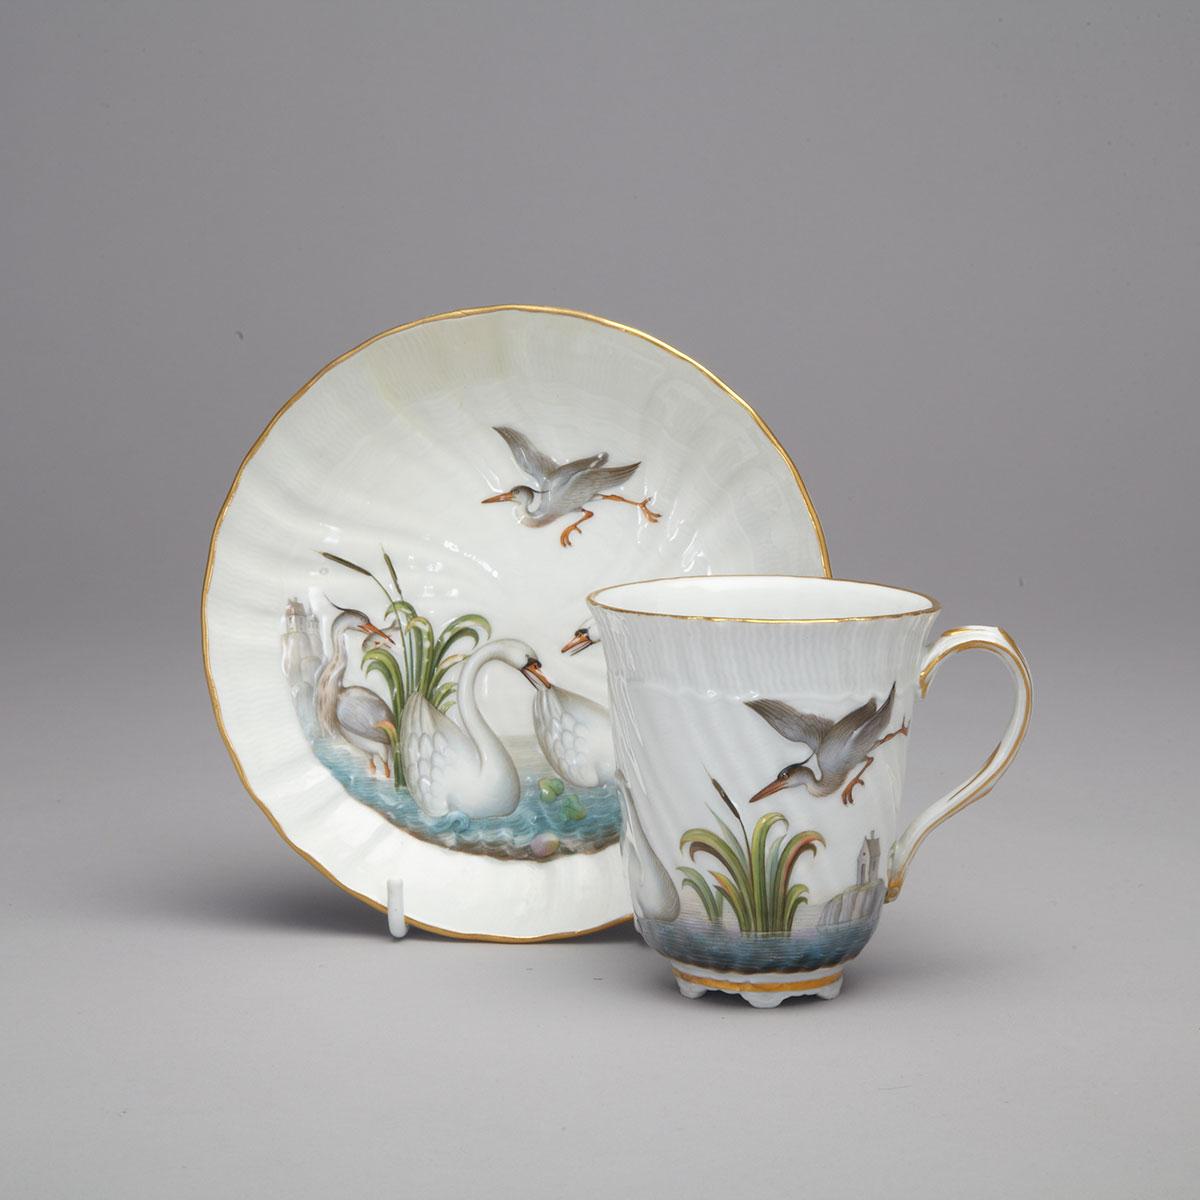 Meissen ‘Swan’ Pattern Chocolate Cup and Saucer, late 19th/early 20th century